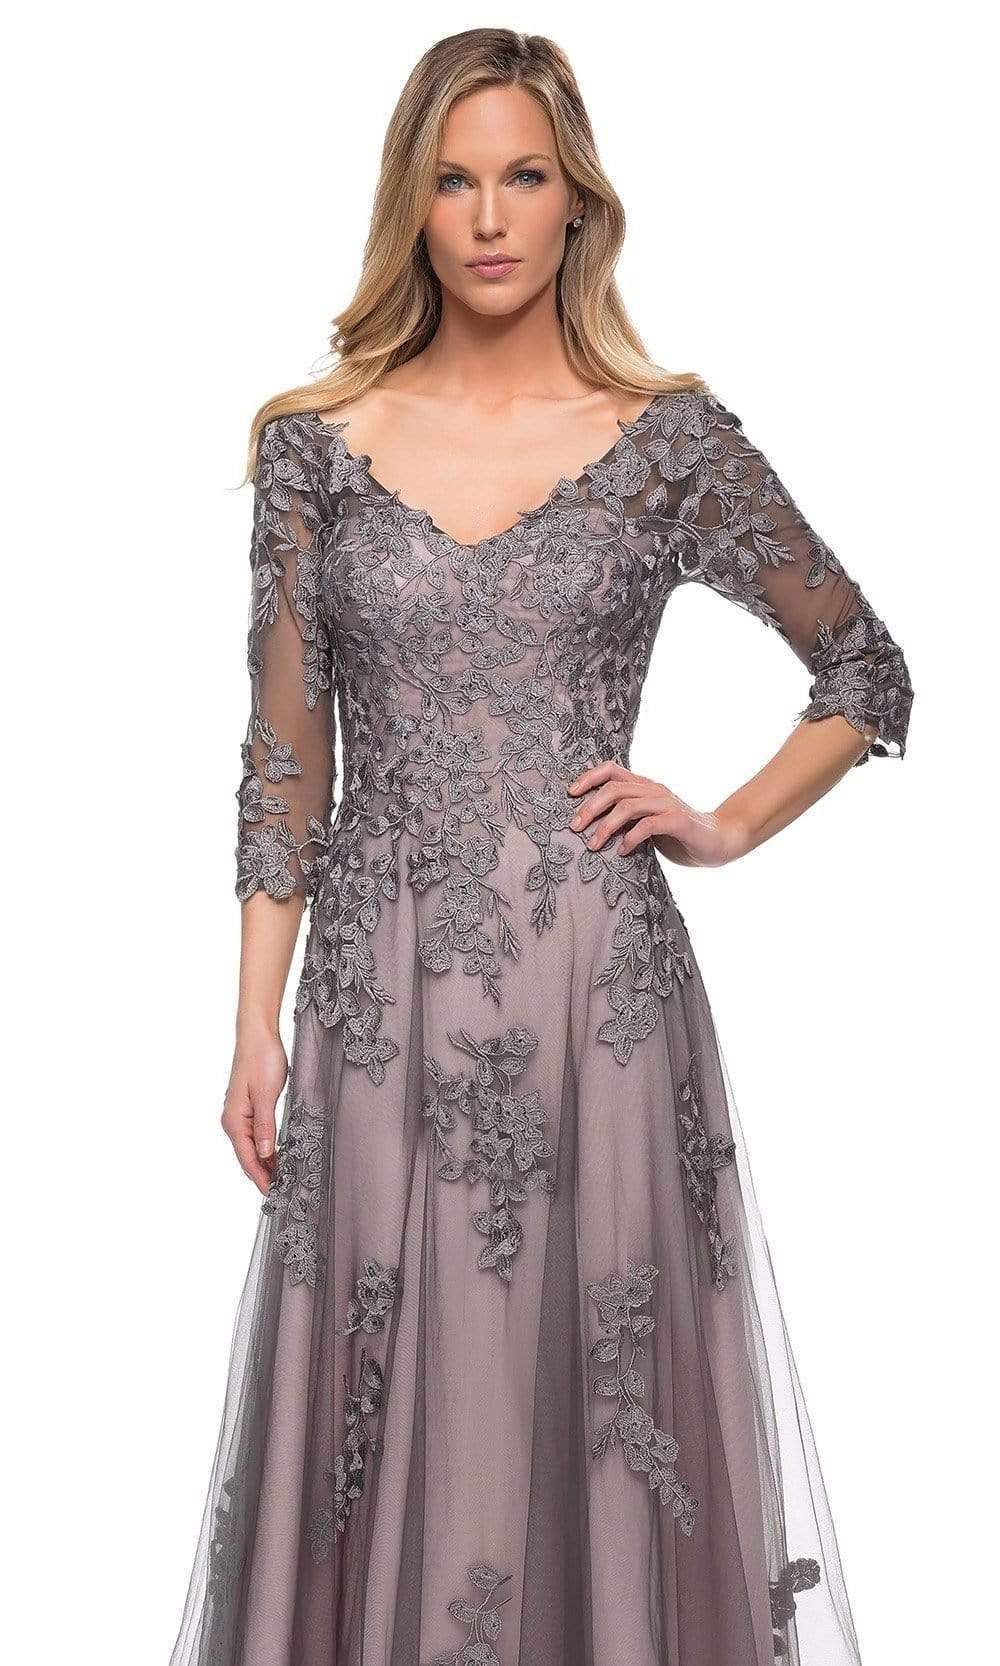 La Femme - 29205 Floral Embroidered A-line Gown Mother of the Bride Dresses